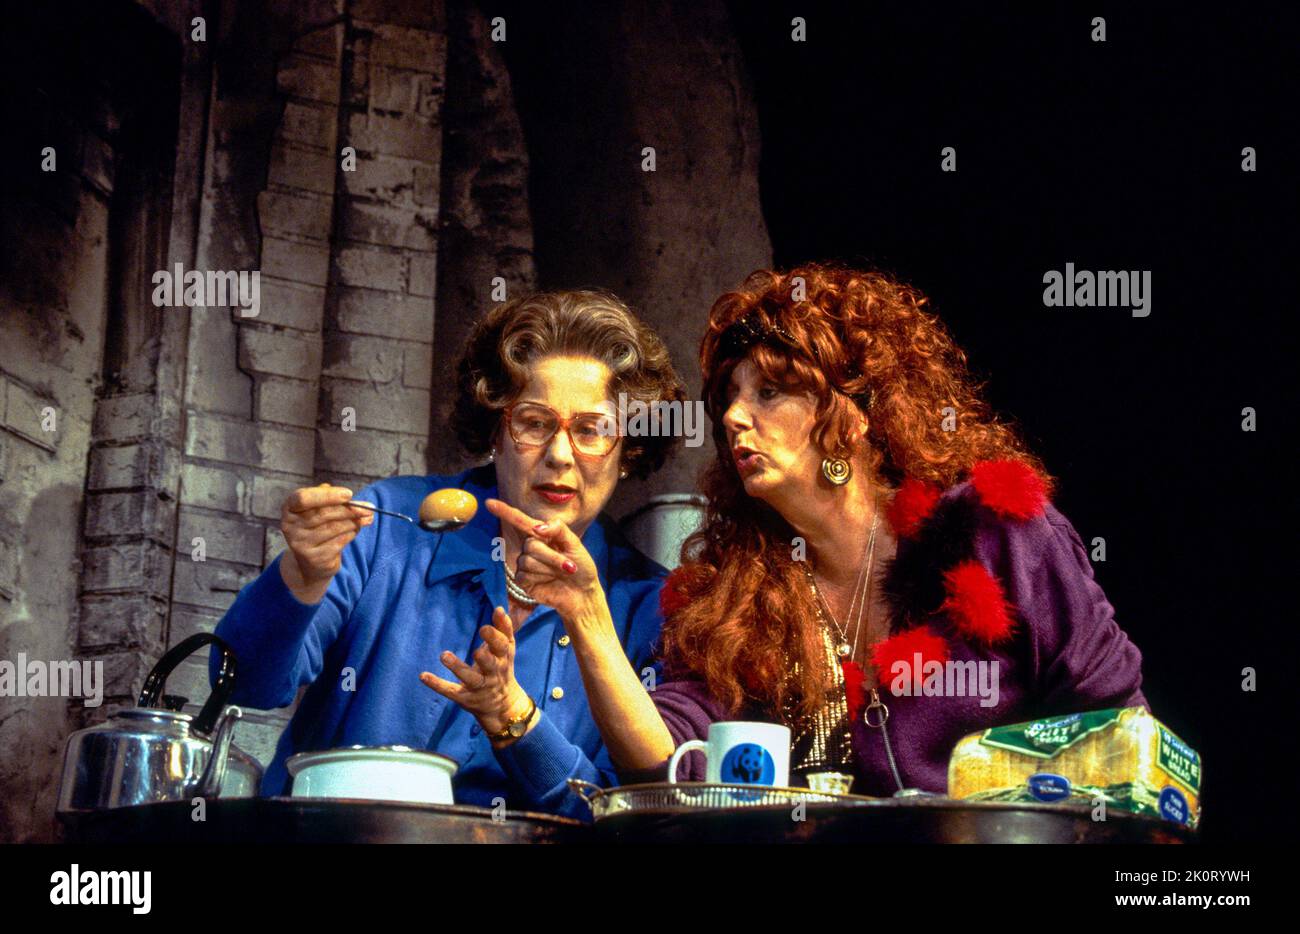 l-r: PAM Ferris (The Queen), Carole Hayman (Violet Toby) in THE QUEEN AND I von Se Townsend am Royal Court Theatre, London SW1 11/06/1994 eine Koproduktion mit Out of Joint und Haymarket Theatre, Leicester Musik & Texte: Mickey Gallagher & Ian Dury Design: Fotini Dimou Beleuchtung: Rick Fisher Regie: Max Stafford-Clark Stockfoto